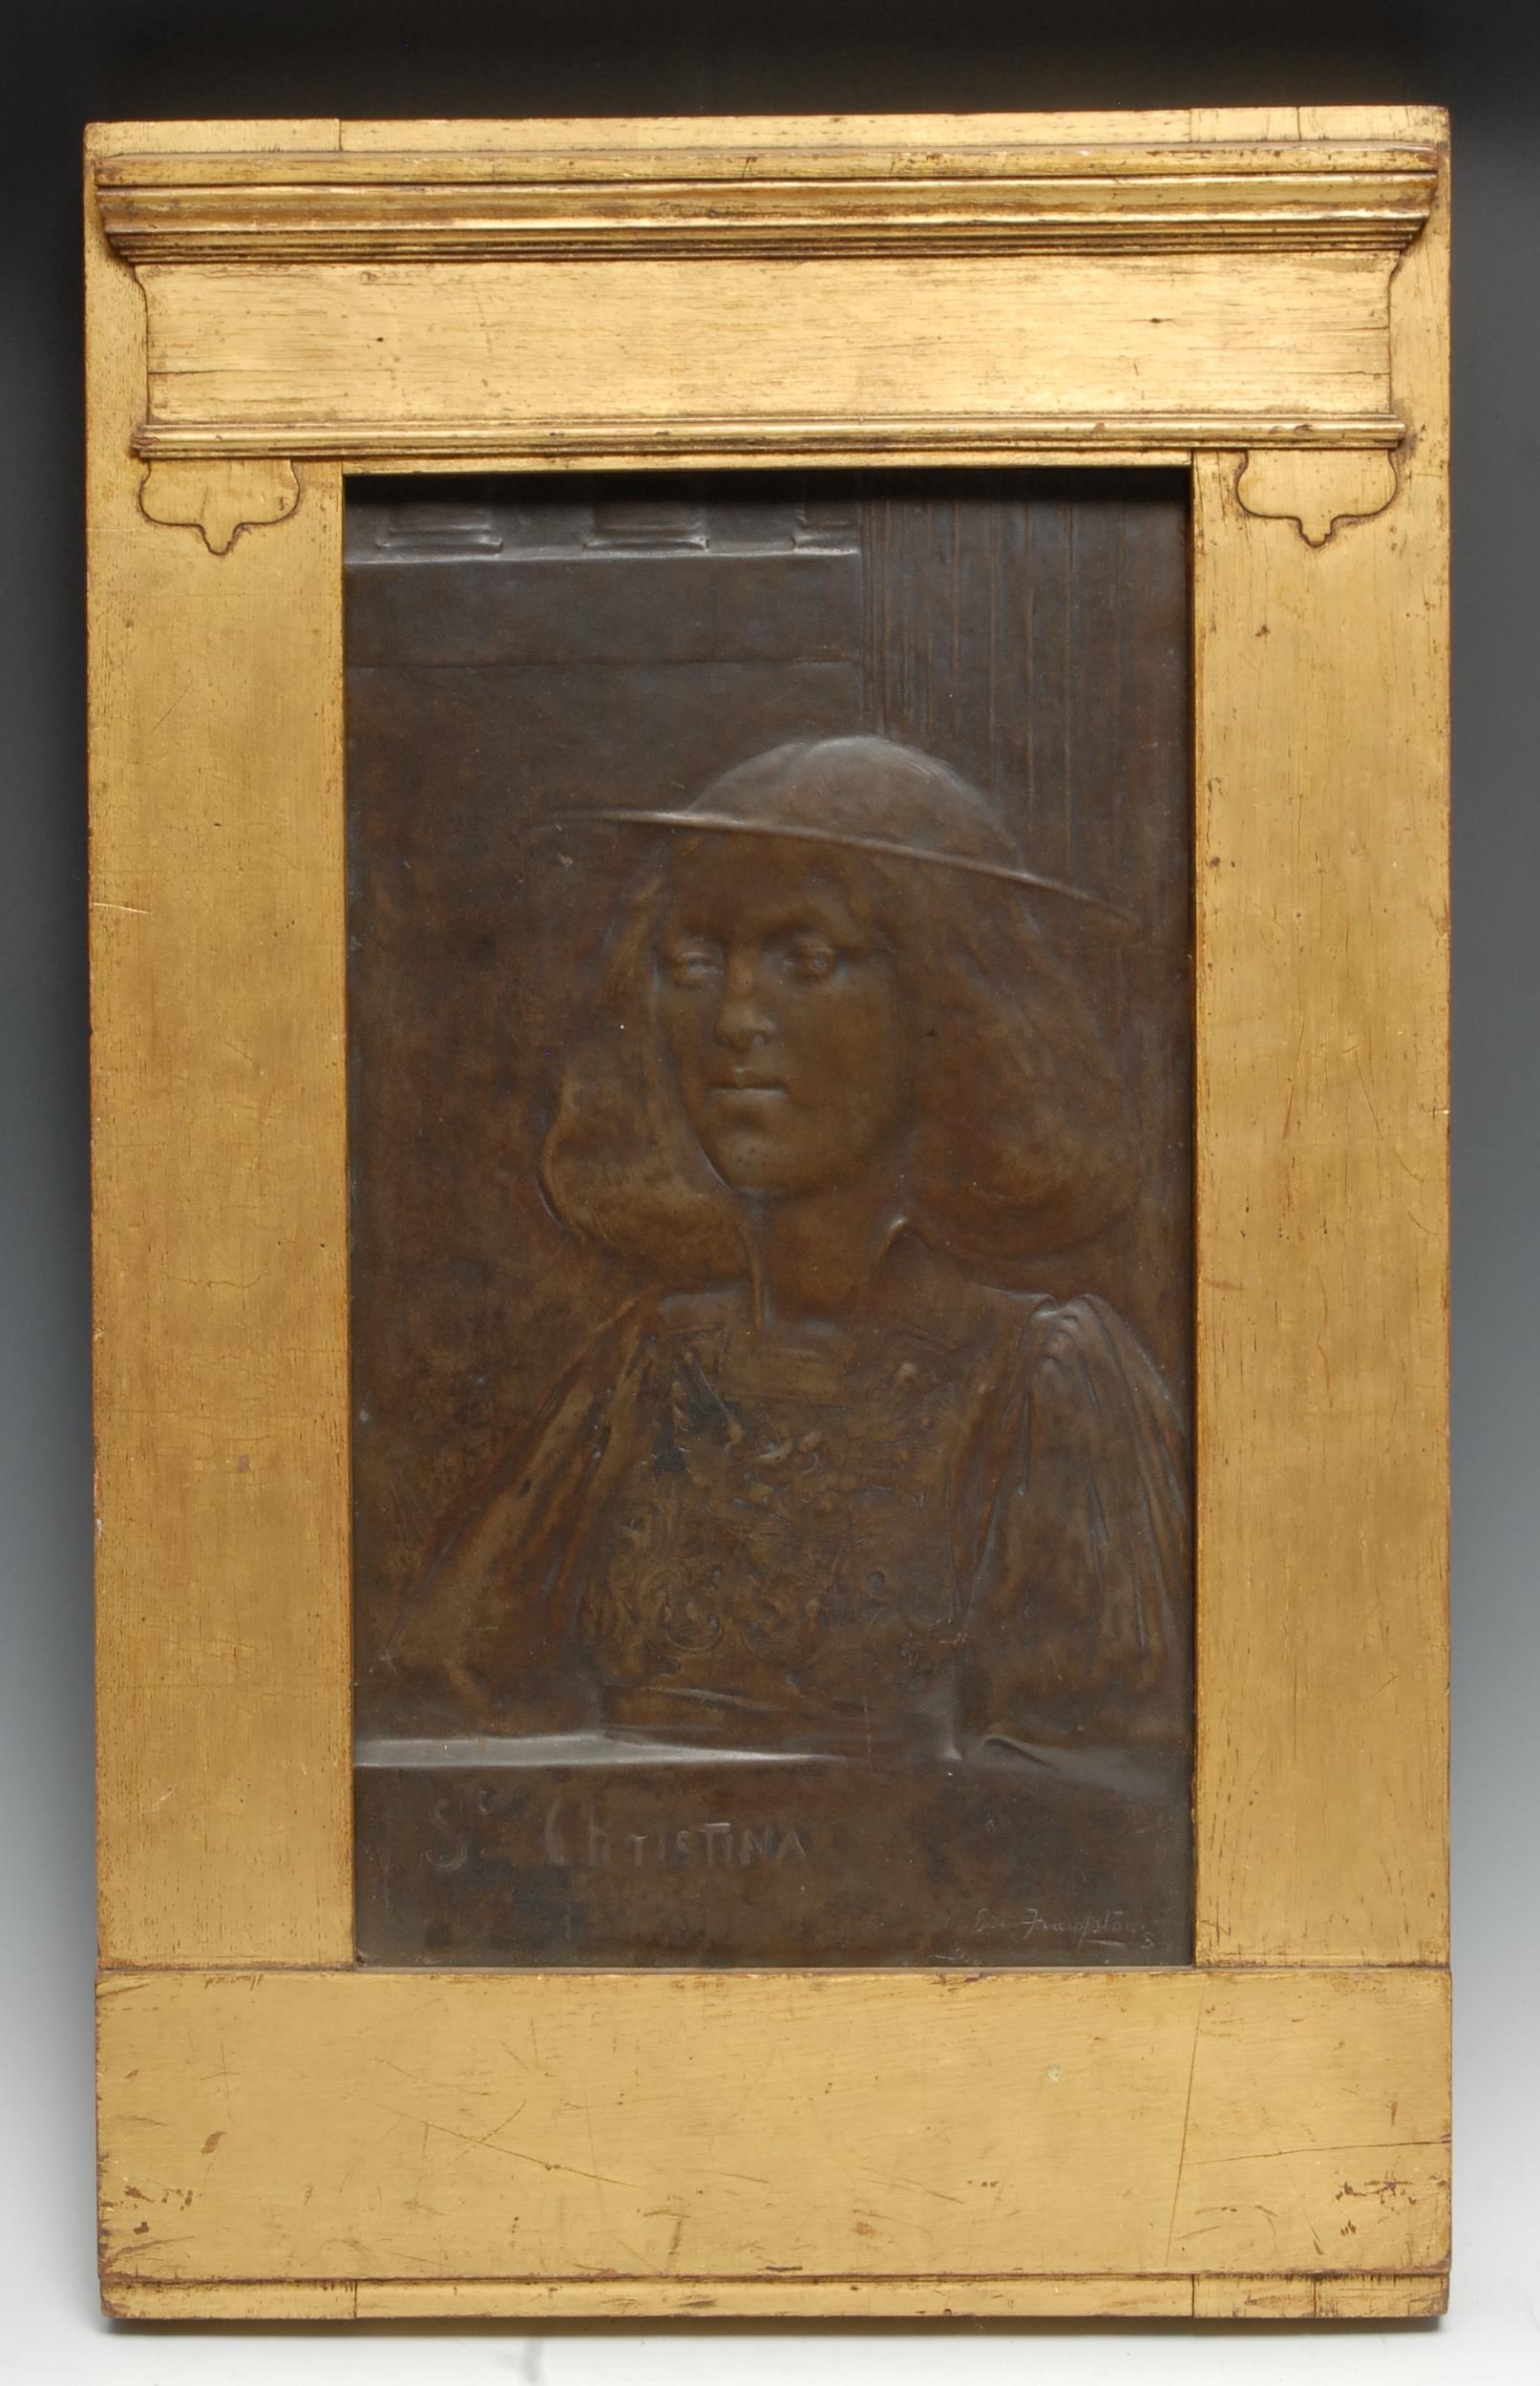 Sir George James Frampton (1860-1928), a brown patinated bronze plaque, St Christina, signed in